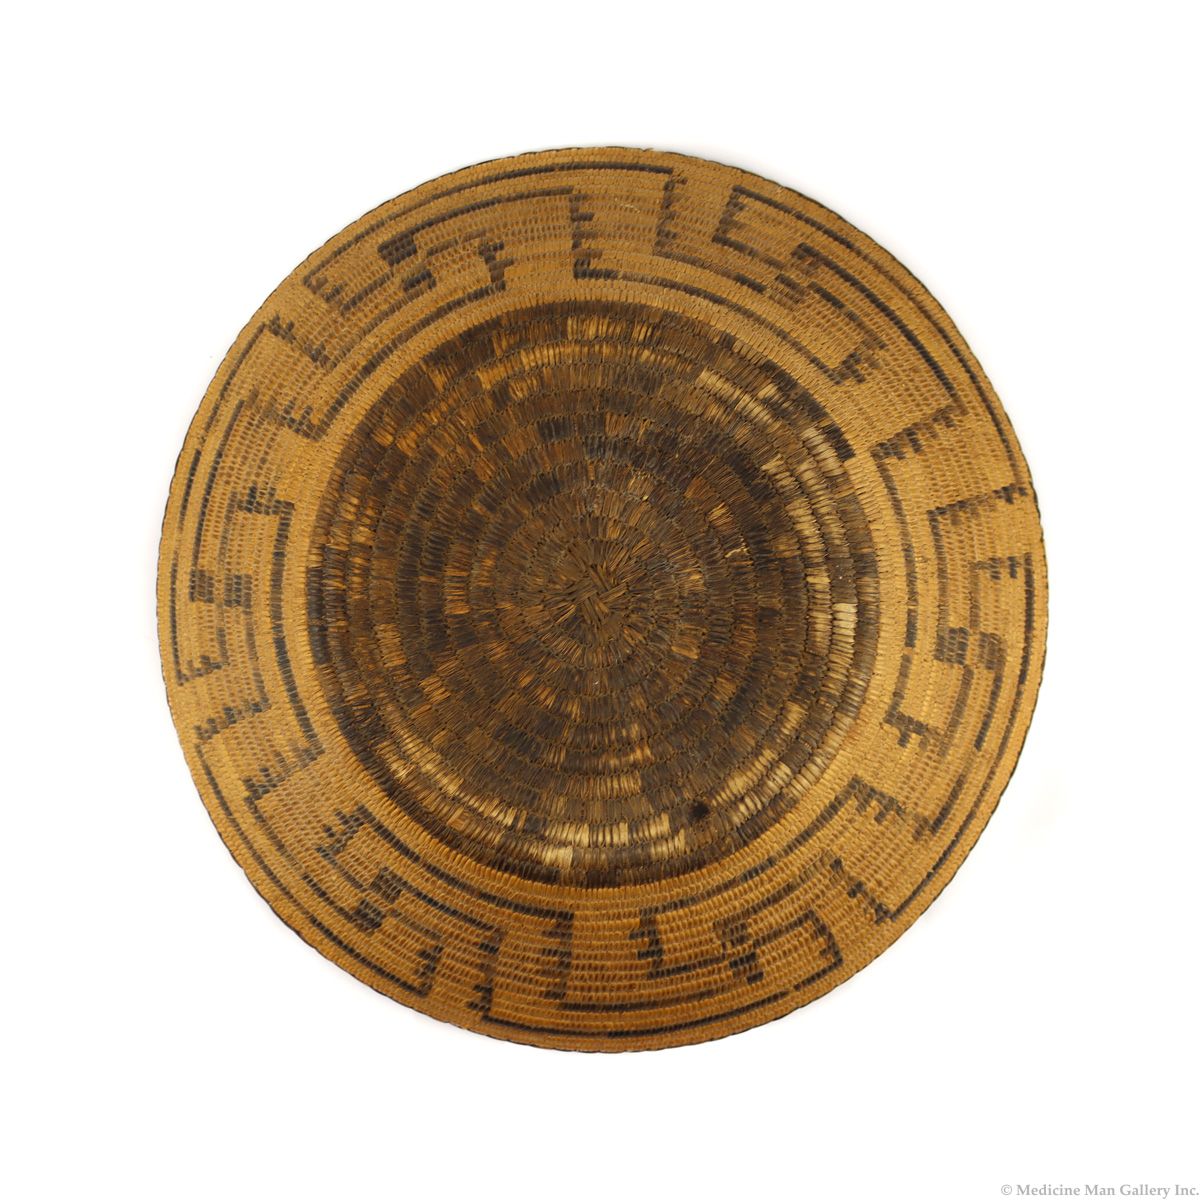 Pima Tray with Whirling Logs Design c. 1900s, 4.5" x 16.5" (SK3468)